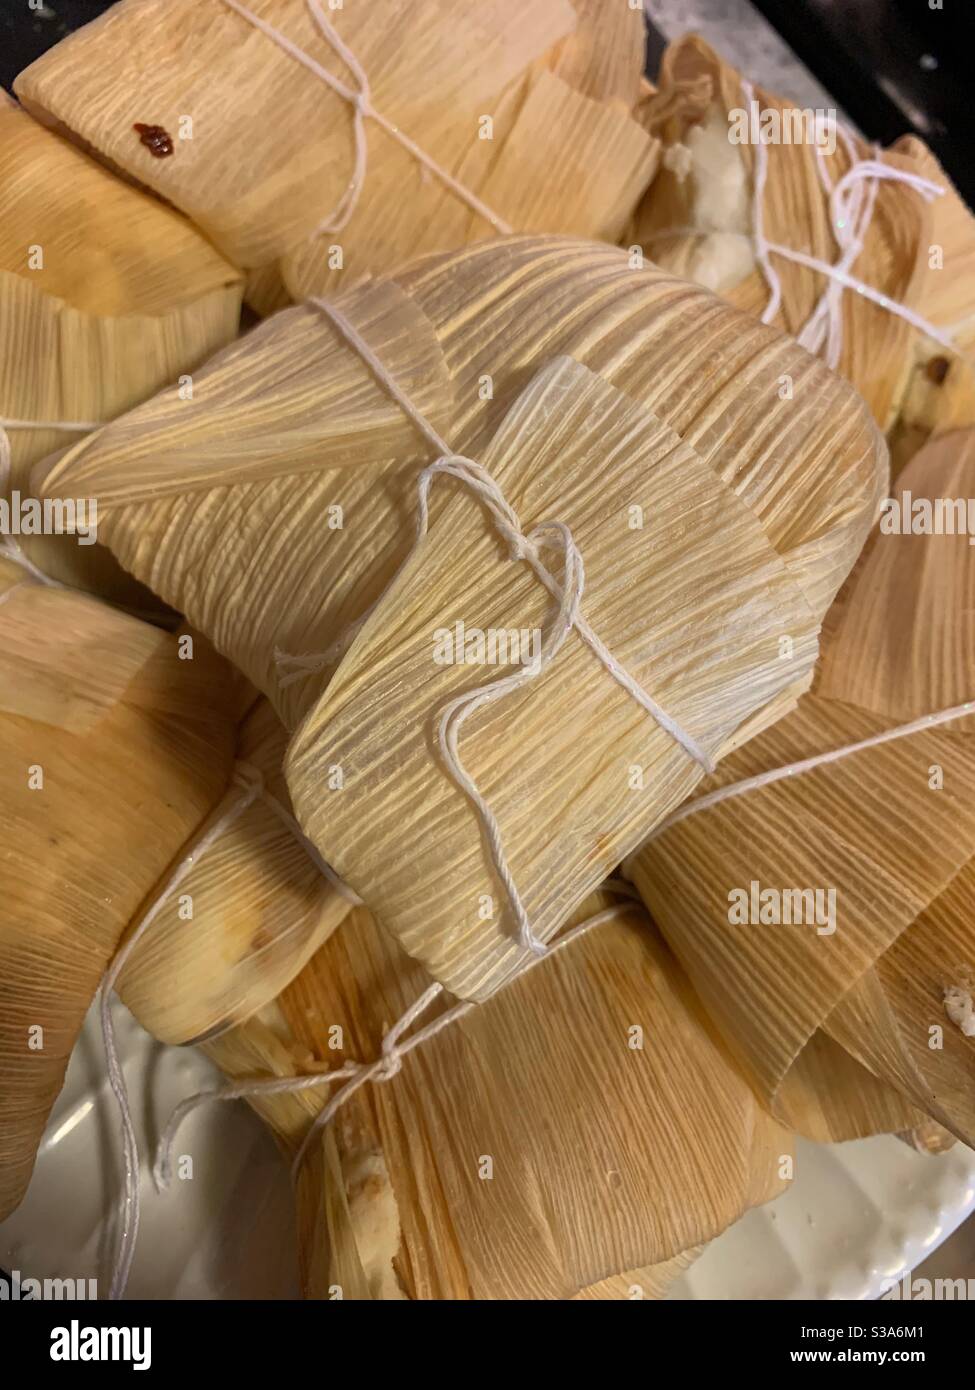 Pile of homemade Mexican tamales for a delicious dinner. Stock Photo